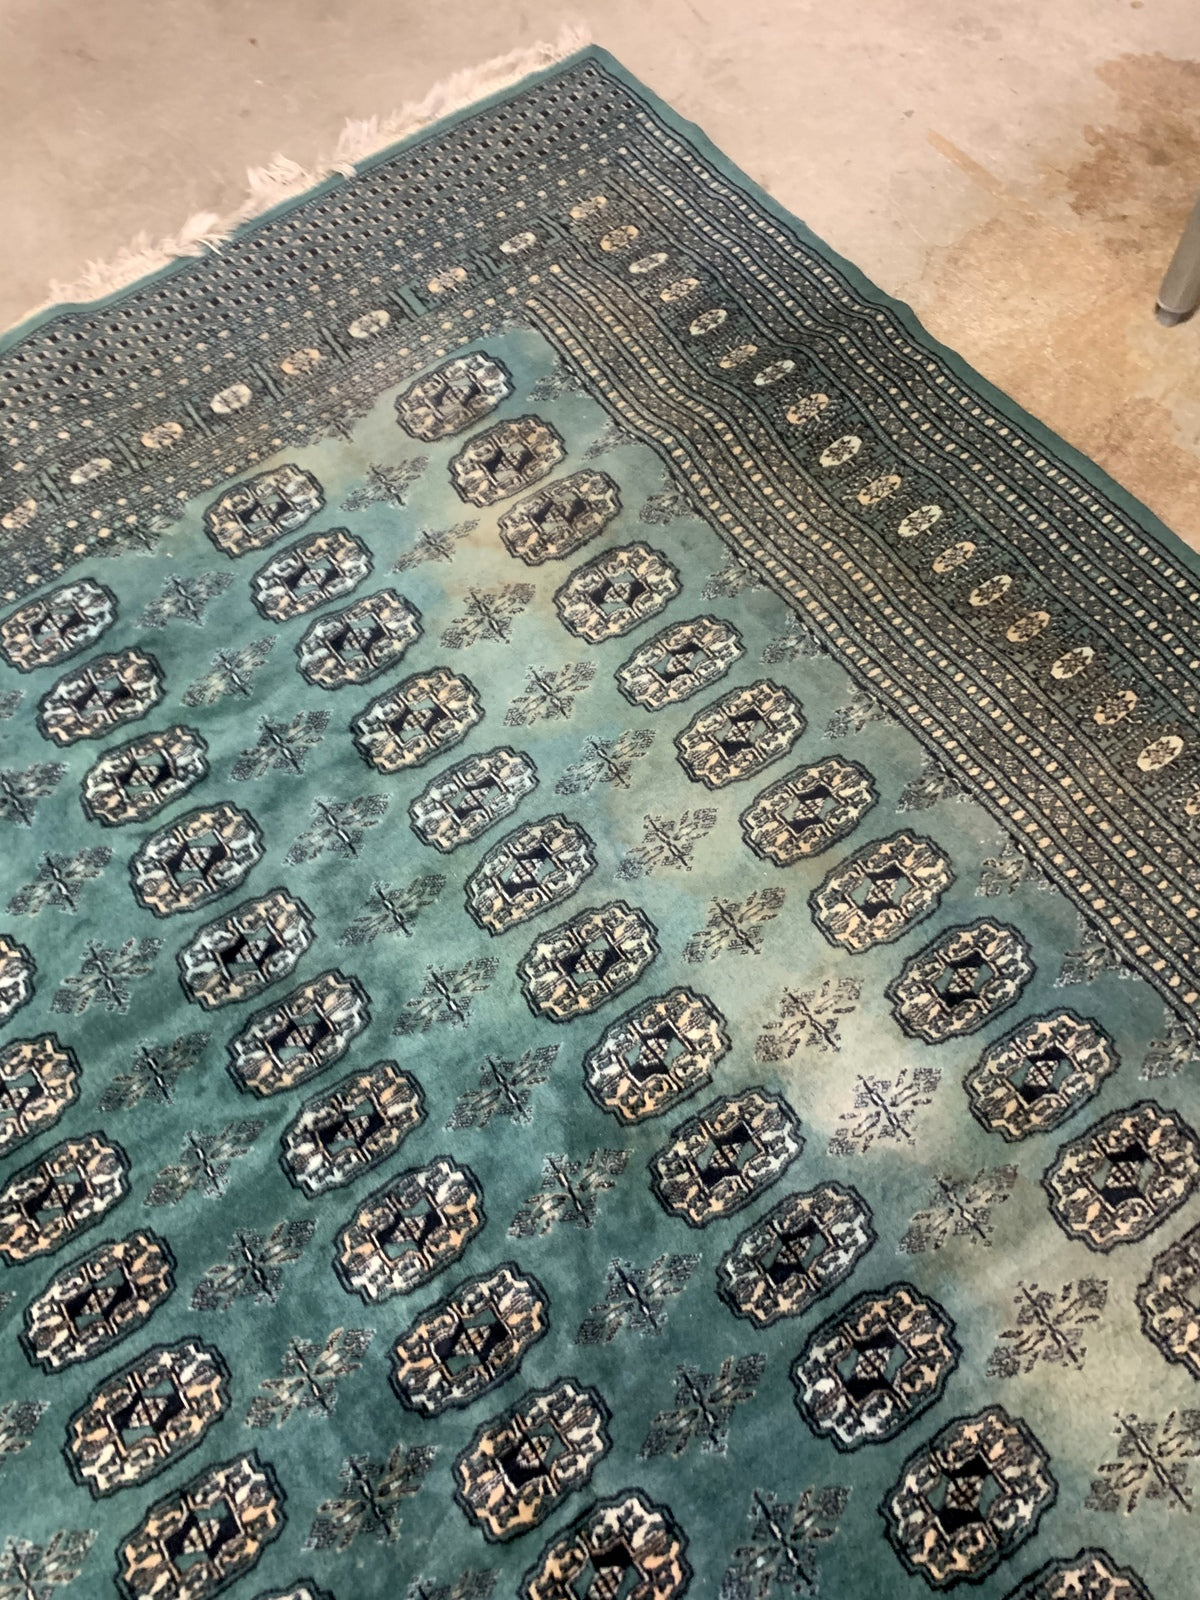 Handmade vintage Uzbek Bukhara rug in Turquoise shade and traditional design. The rug is from the end of 20th century in original condition, it has some age discolorations.